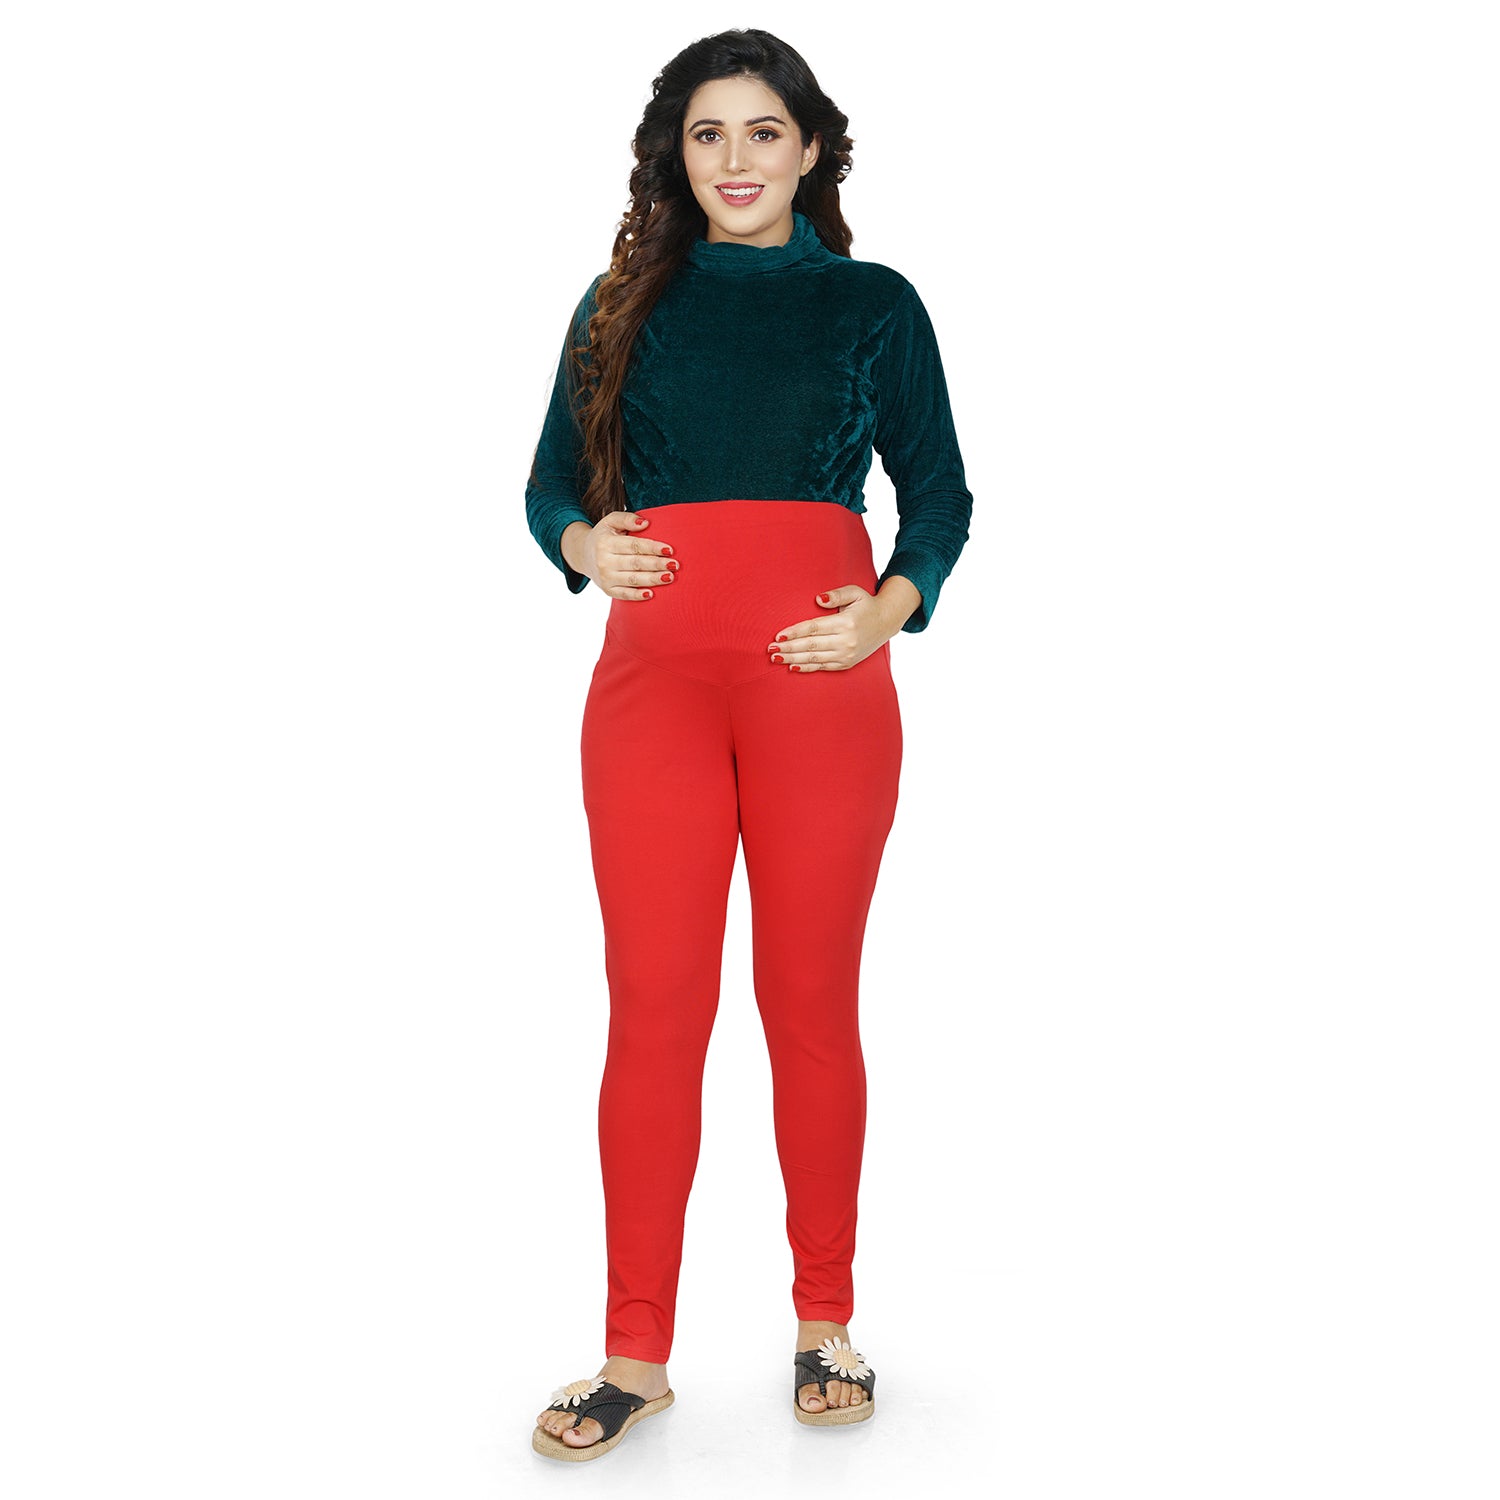 Baby Moo Soft And Comfy Full Length Maternity Leggings Solid - Red